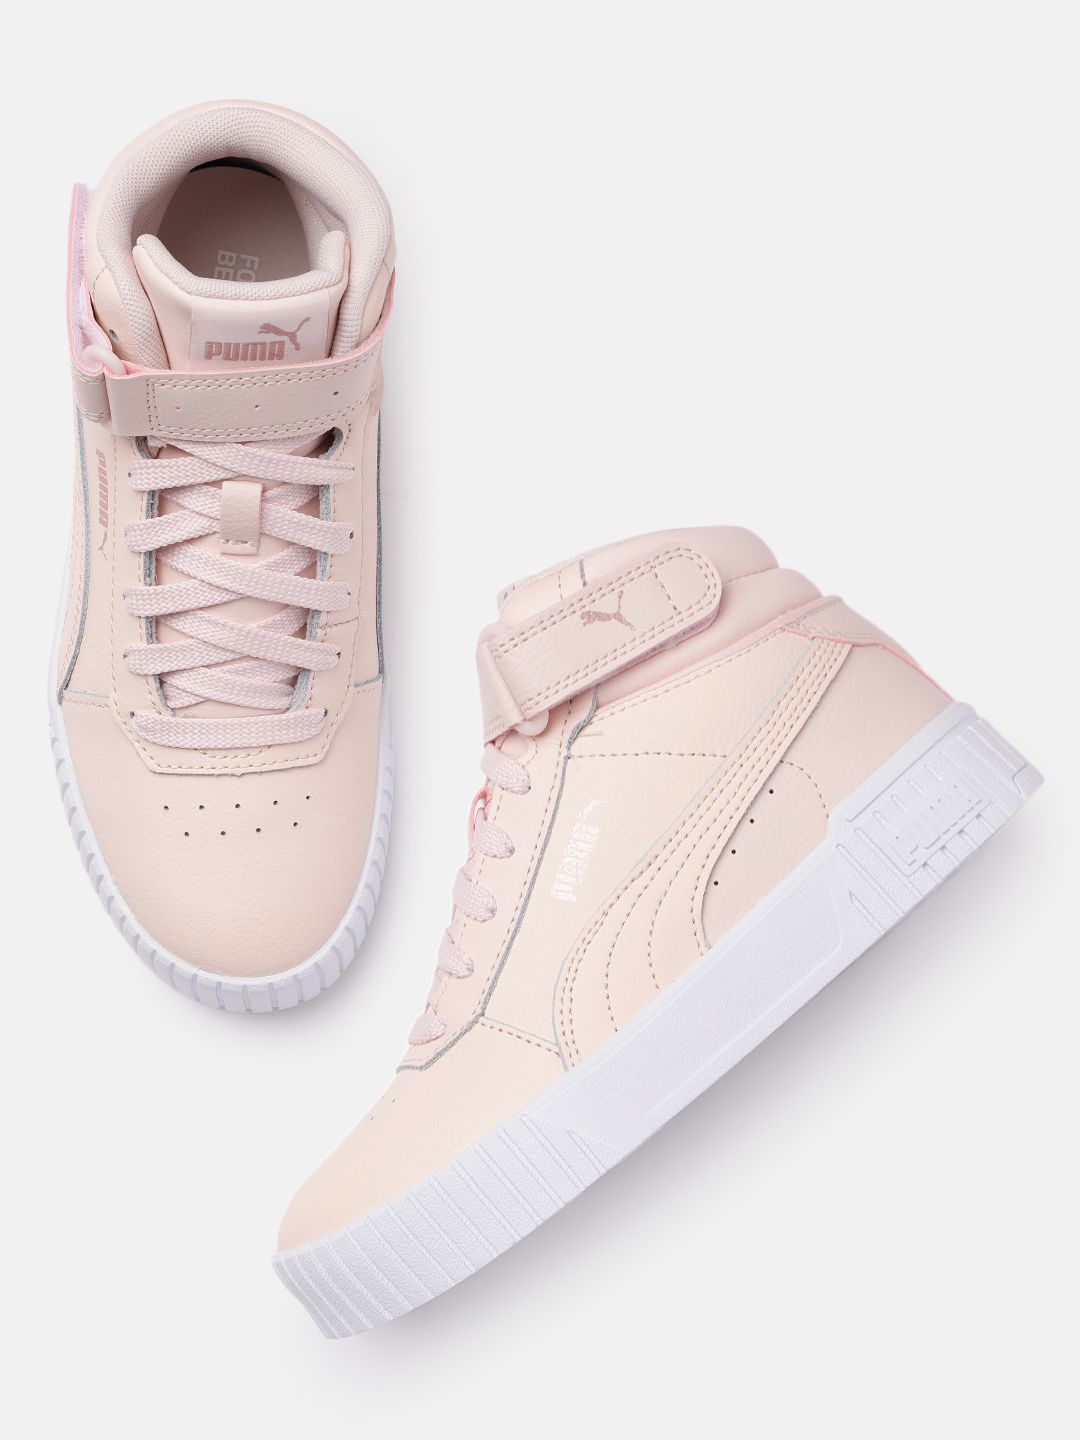 Puma Women Peach-Coloured Carina 2.0 Mid-Top Perforations Leather Sneakers Price in India